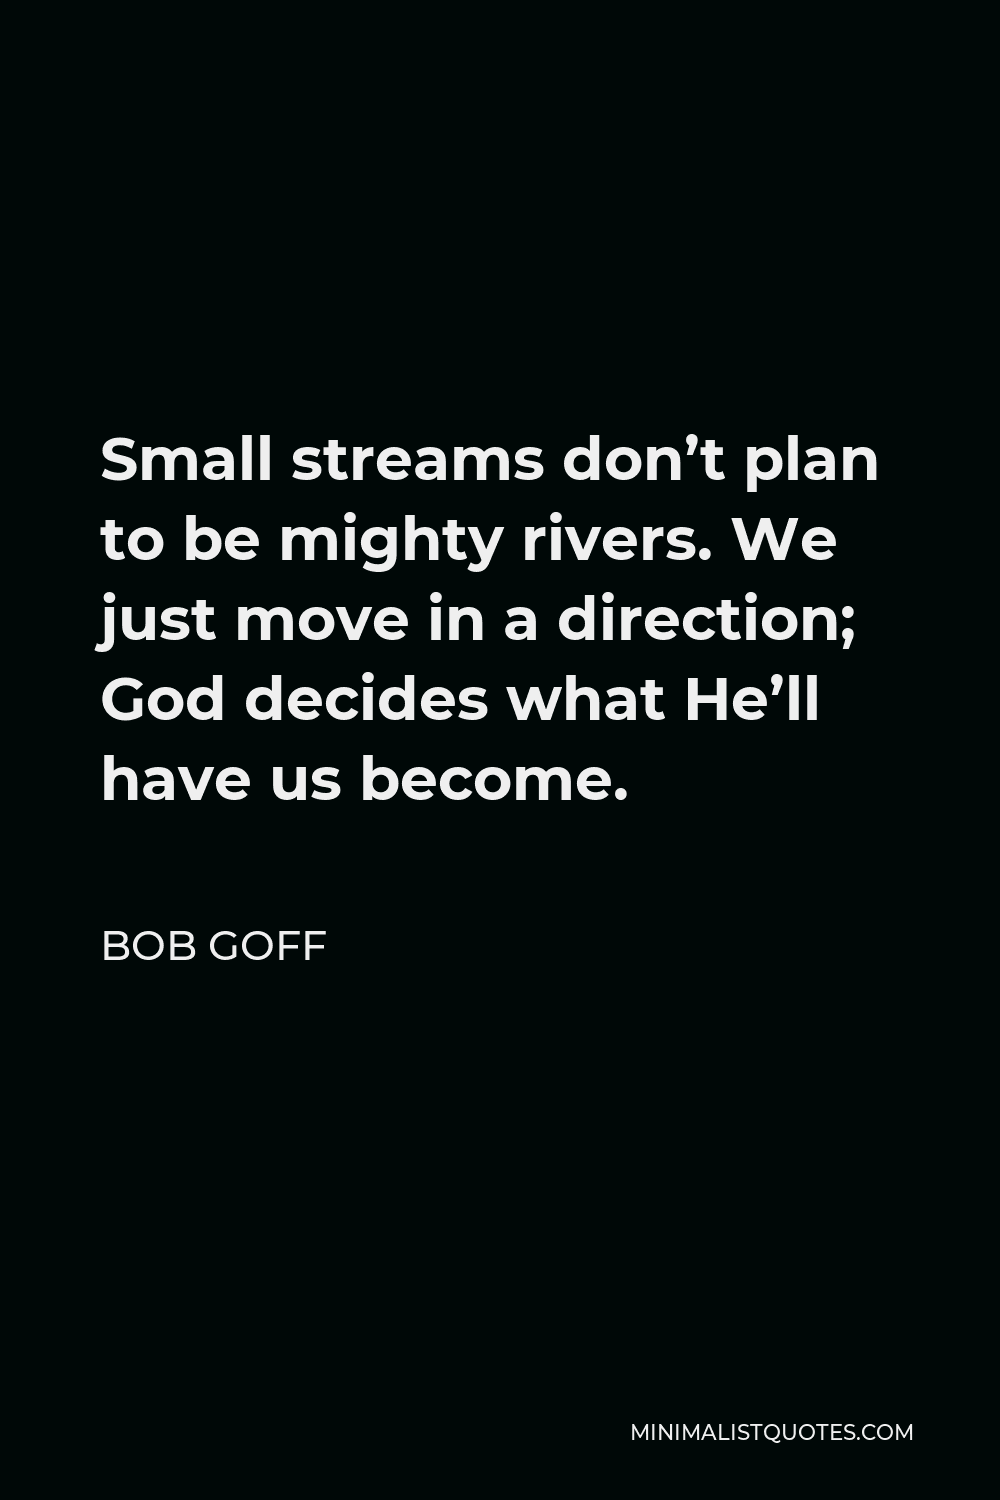 Bob Goff Quote - Small streams don’t plan to be mighty rivers. We just move in a direction; God decides what He’ll have us become.